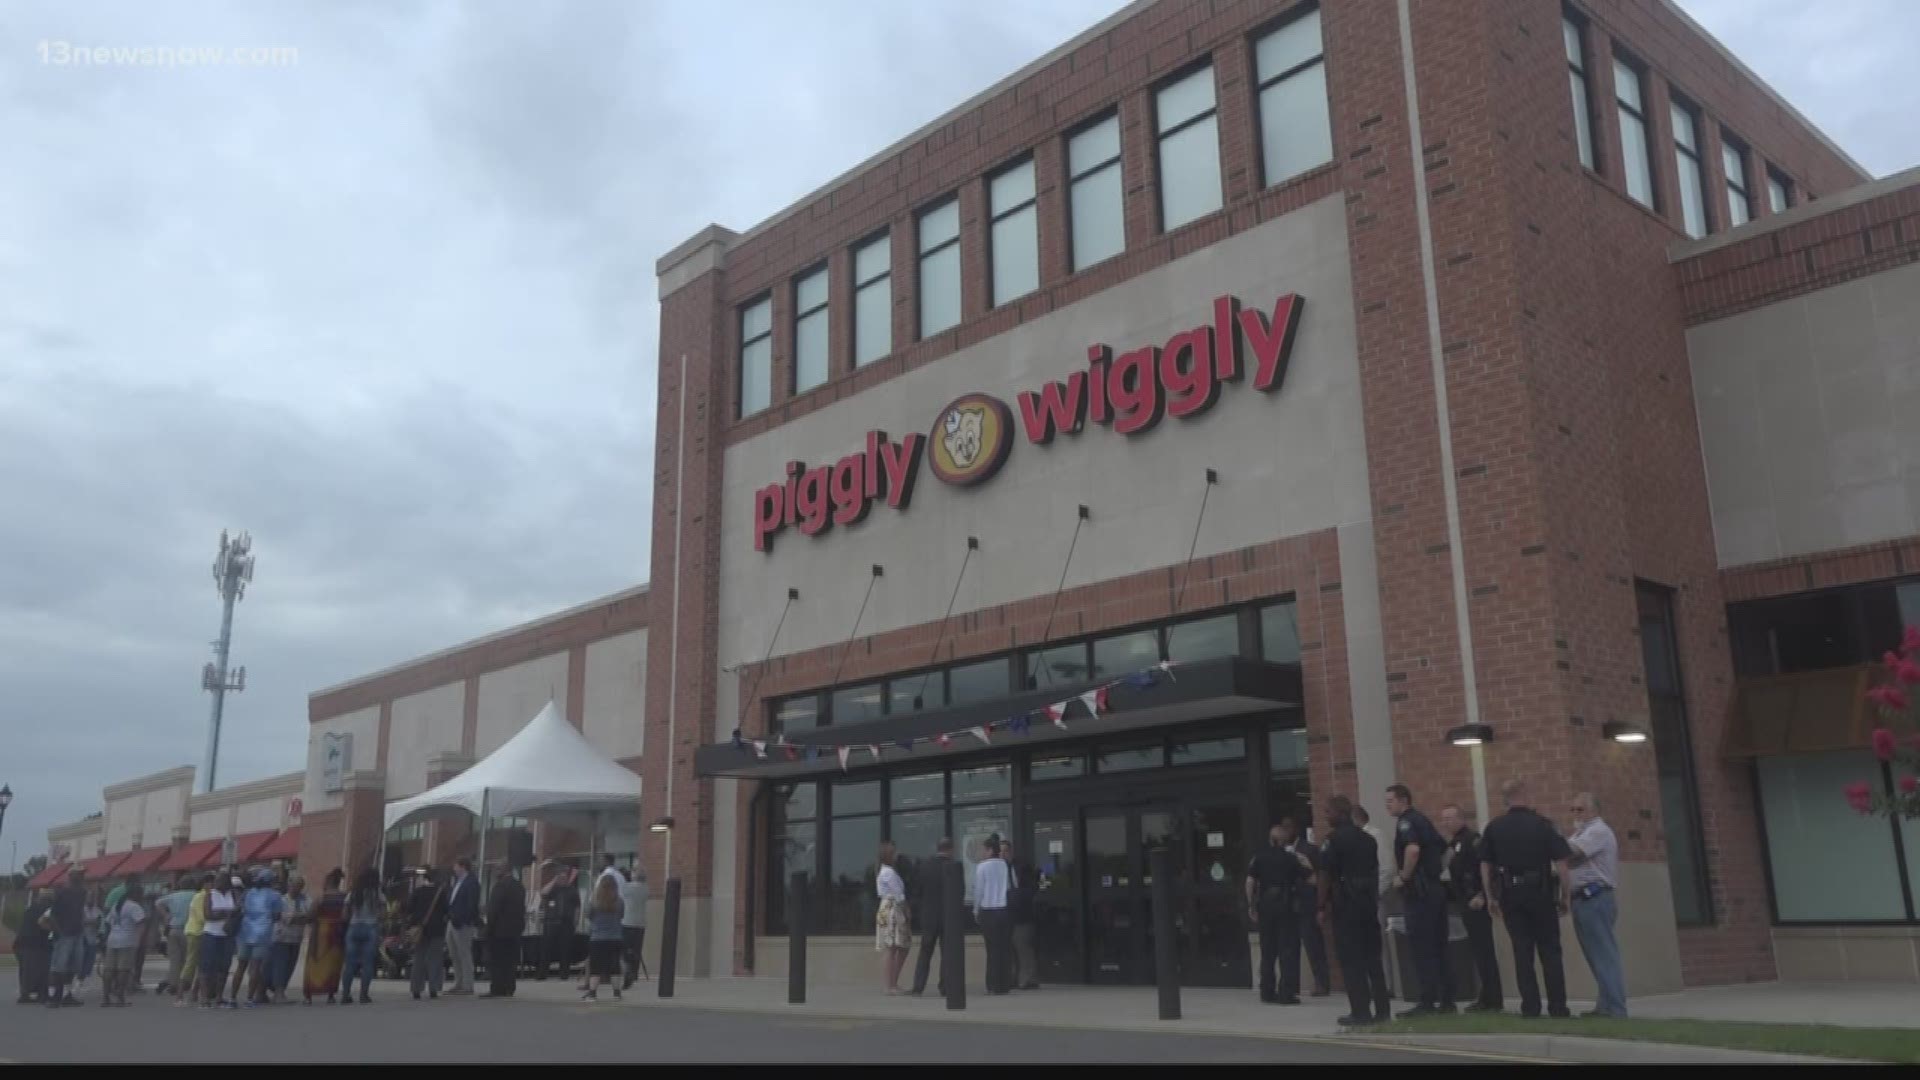 piggly wiggly piggly wiggly near me